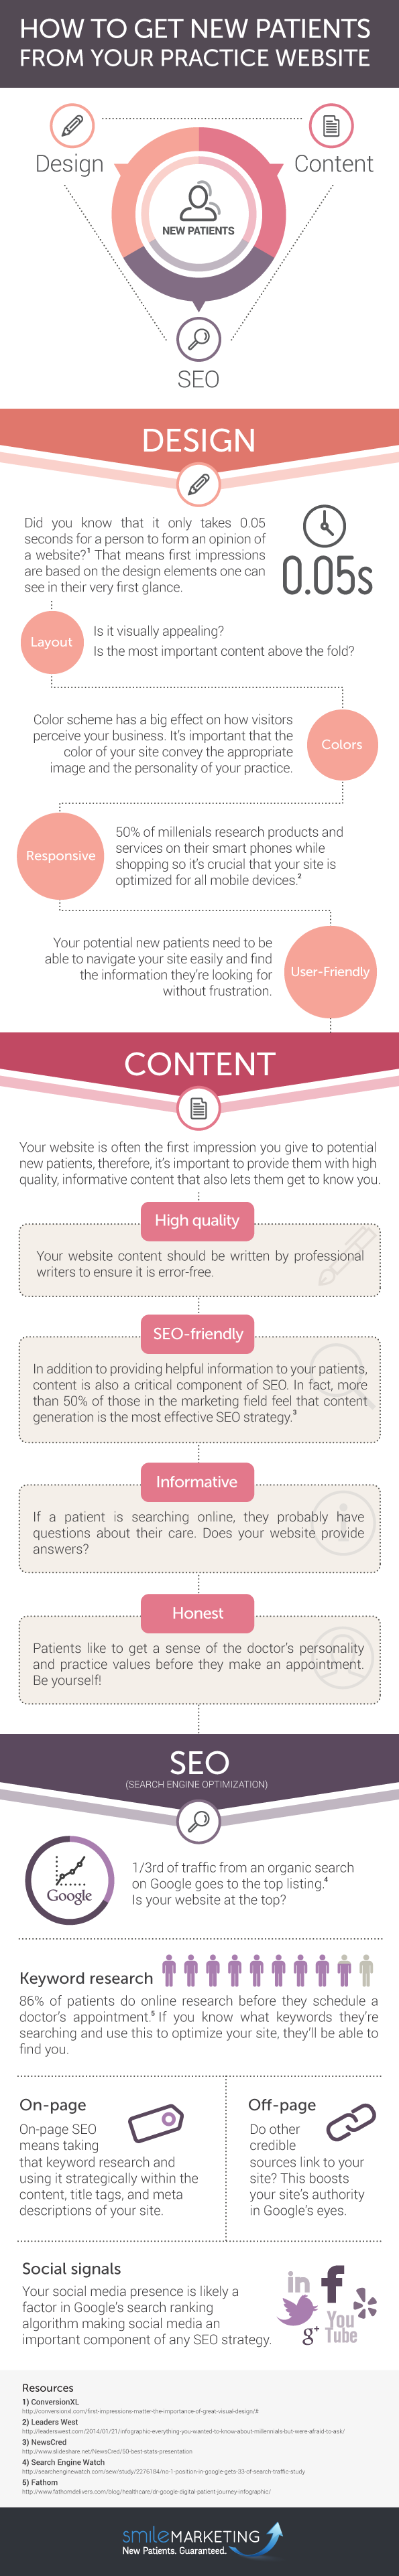 How to Get New Patients from Your Dental Website